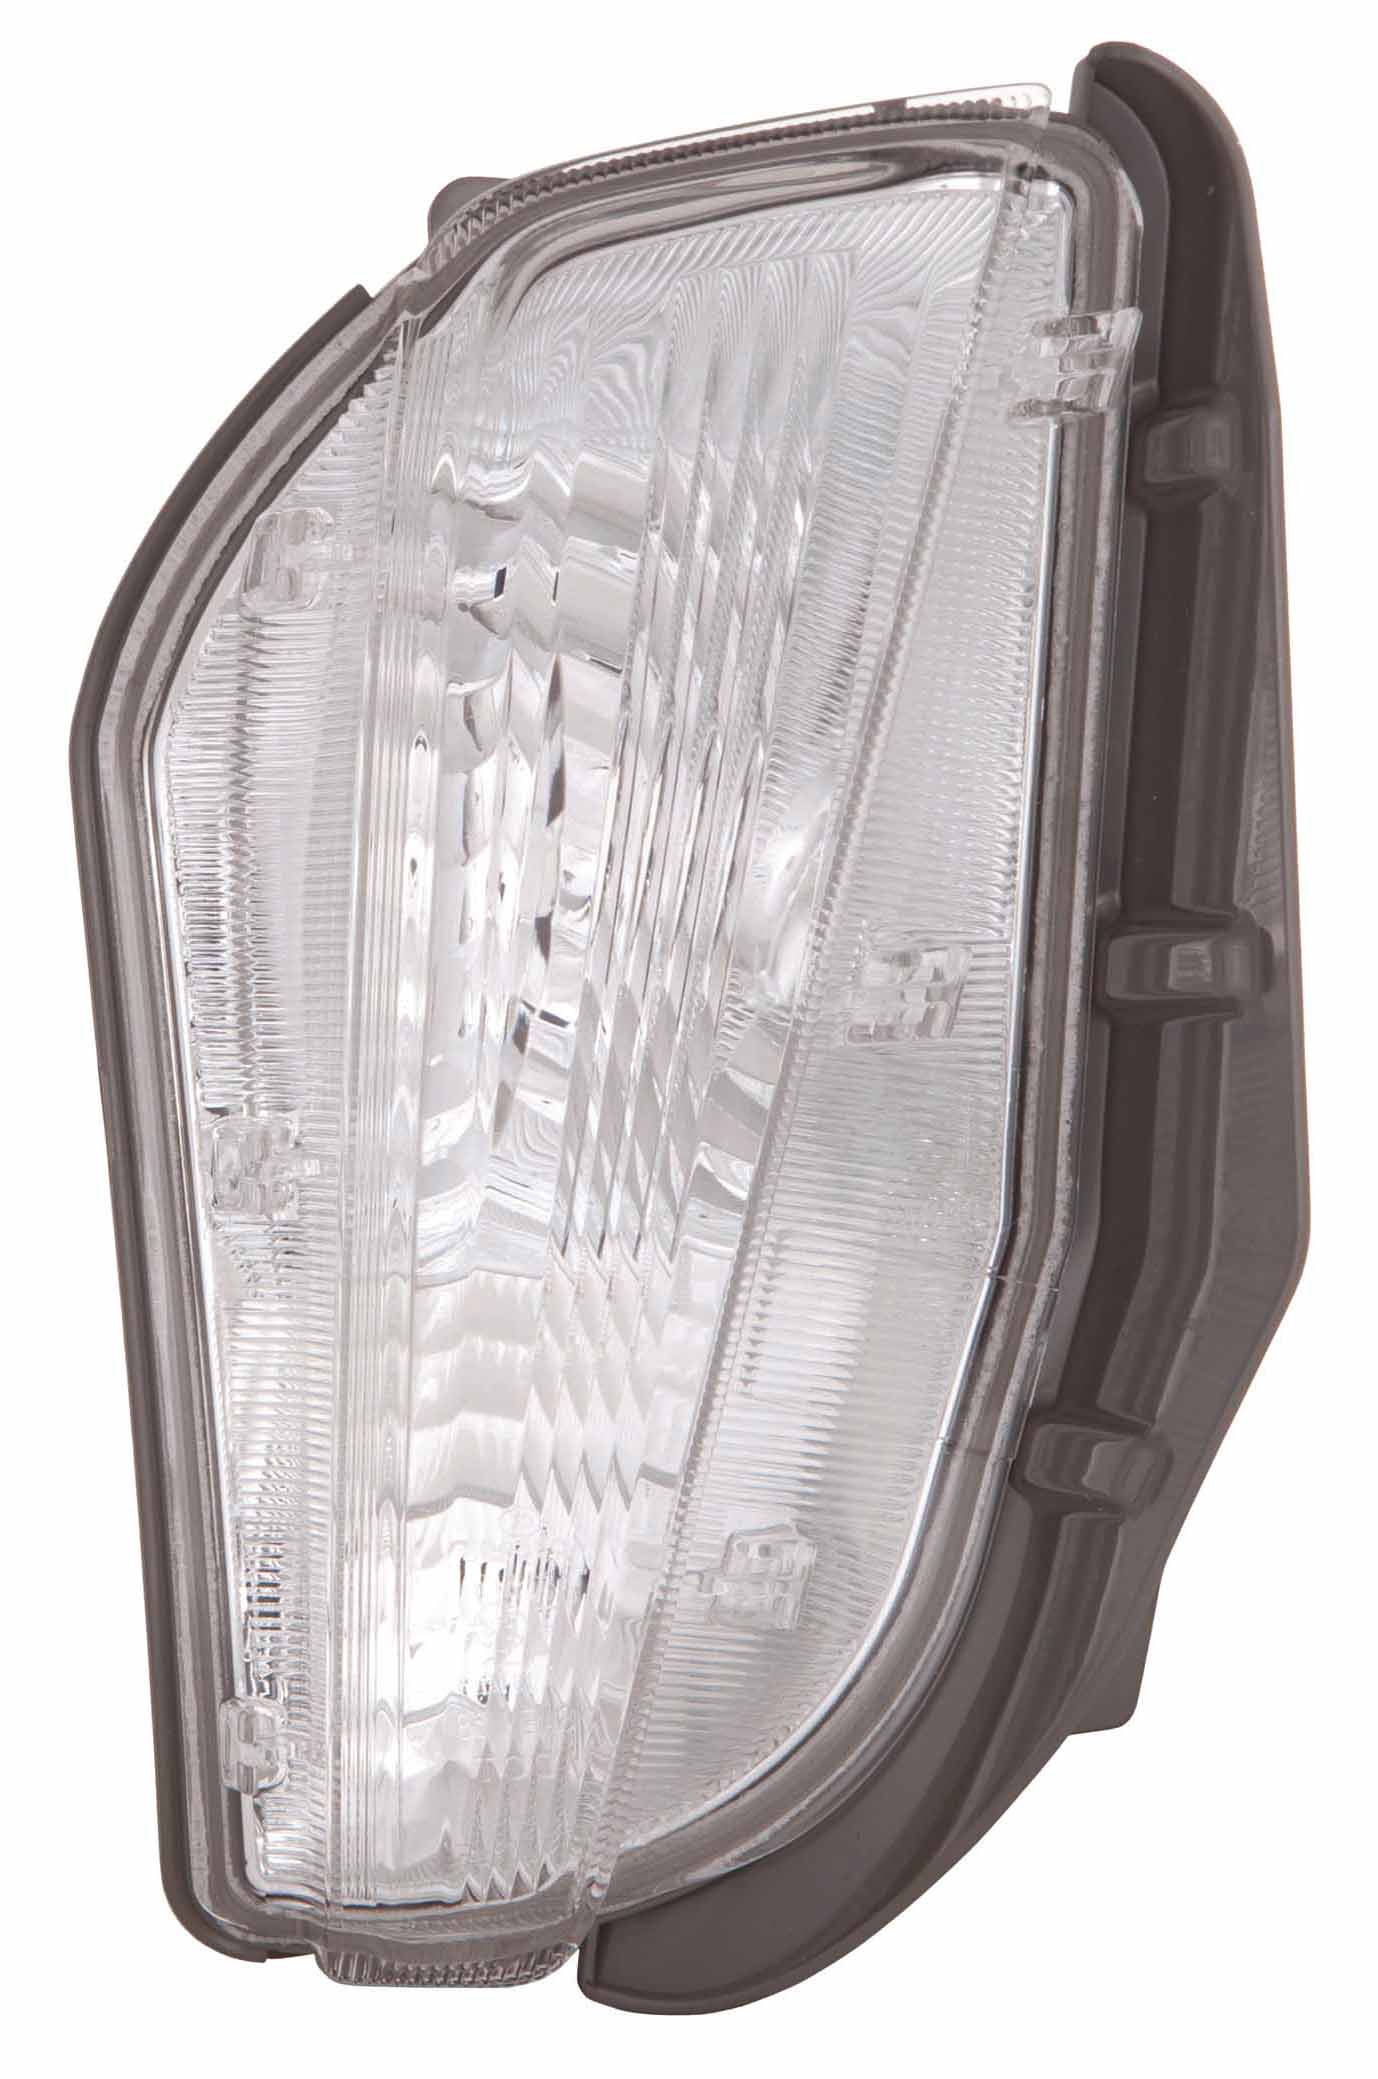 PRIUS V 12-14 Right SIGNAL LAMP Assembly